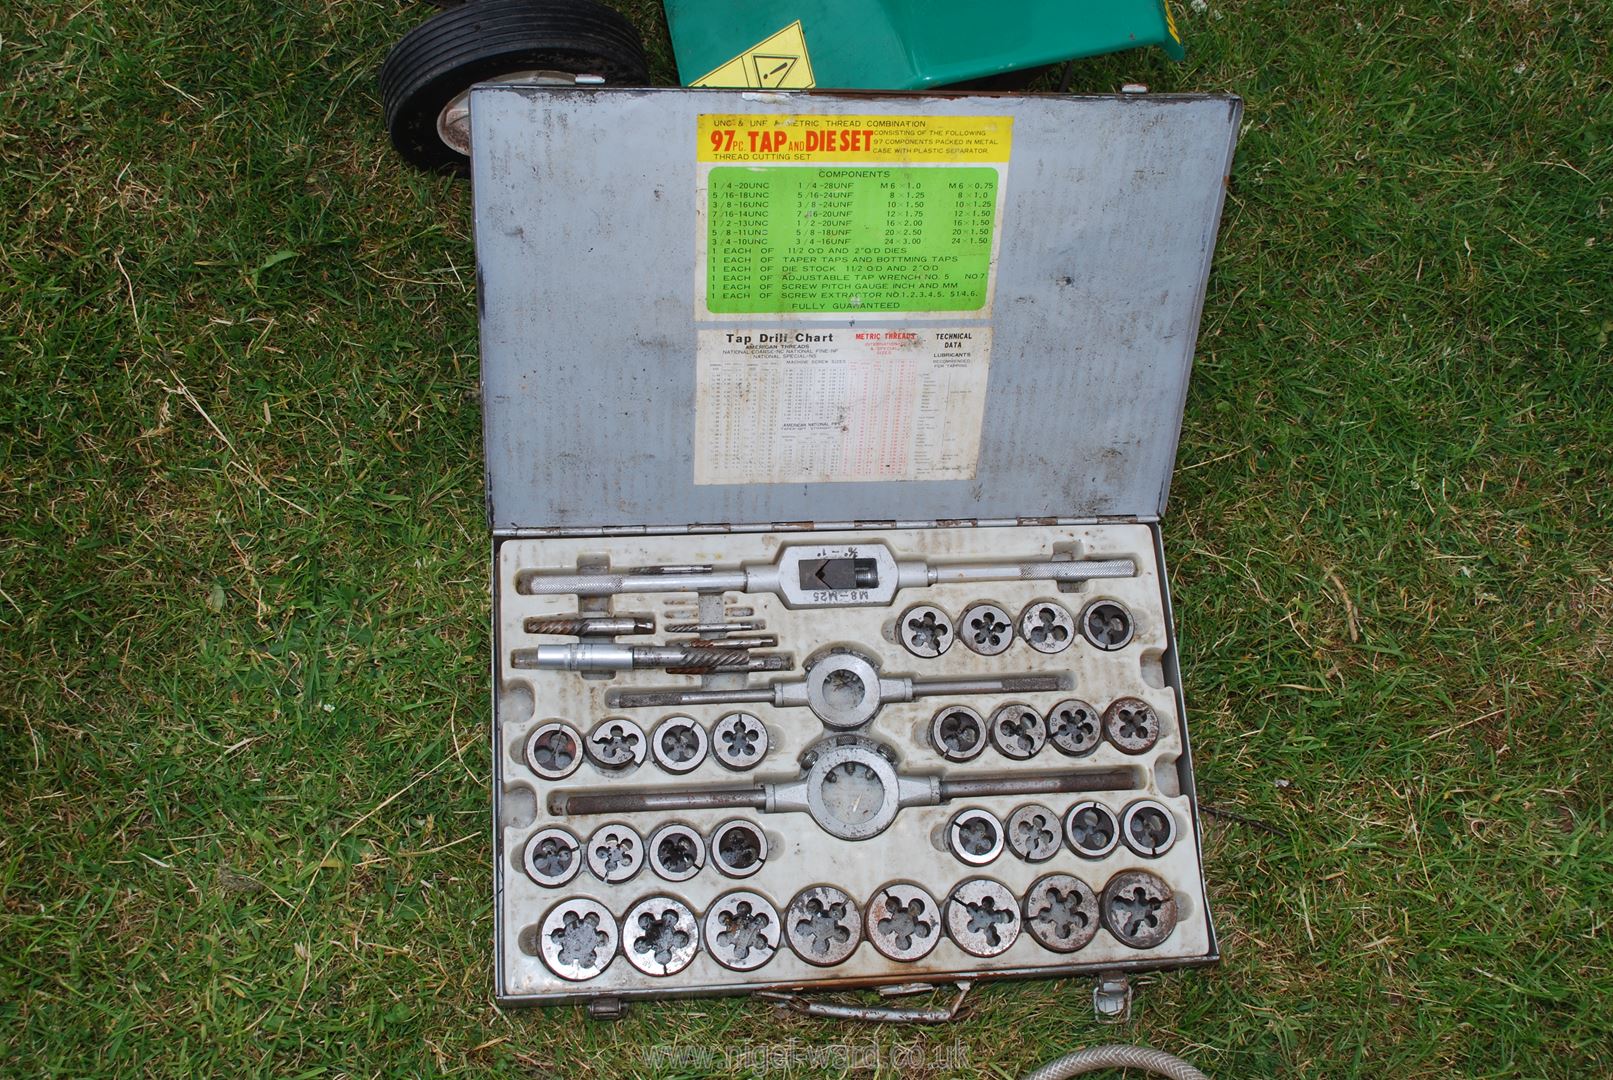 A set of threaders and extractors.